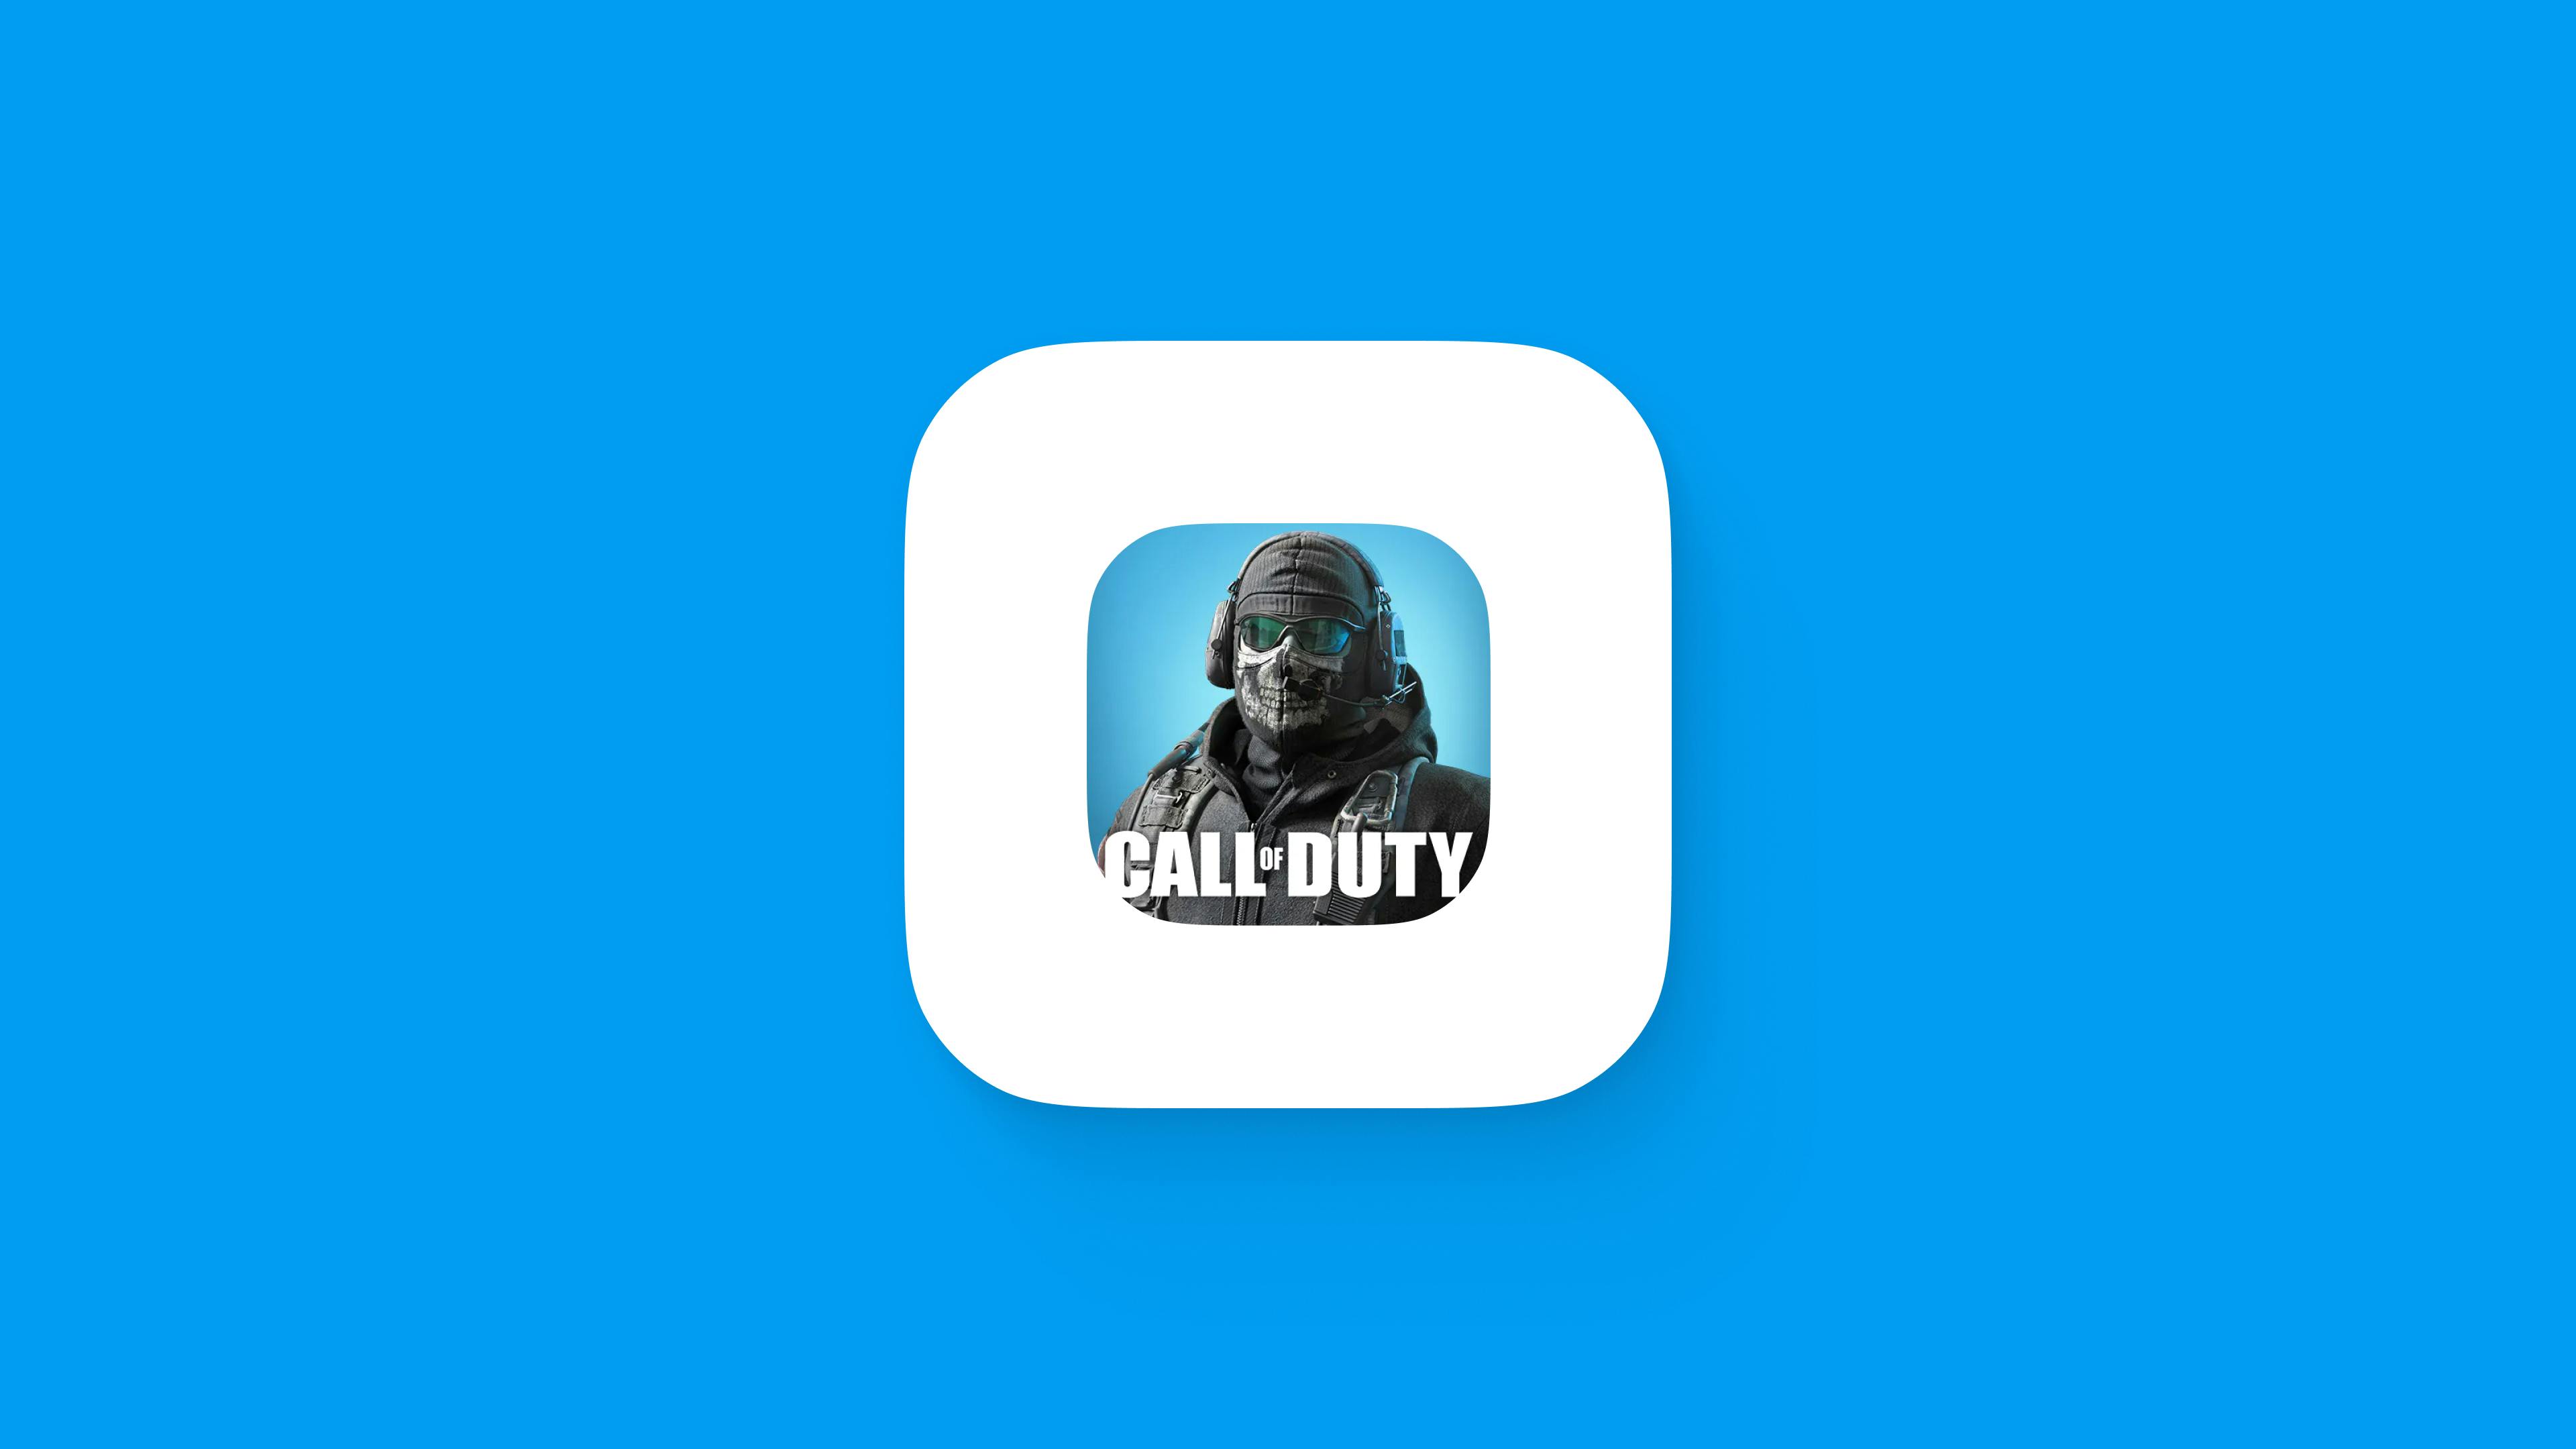 Call of Duty Mobile game logo